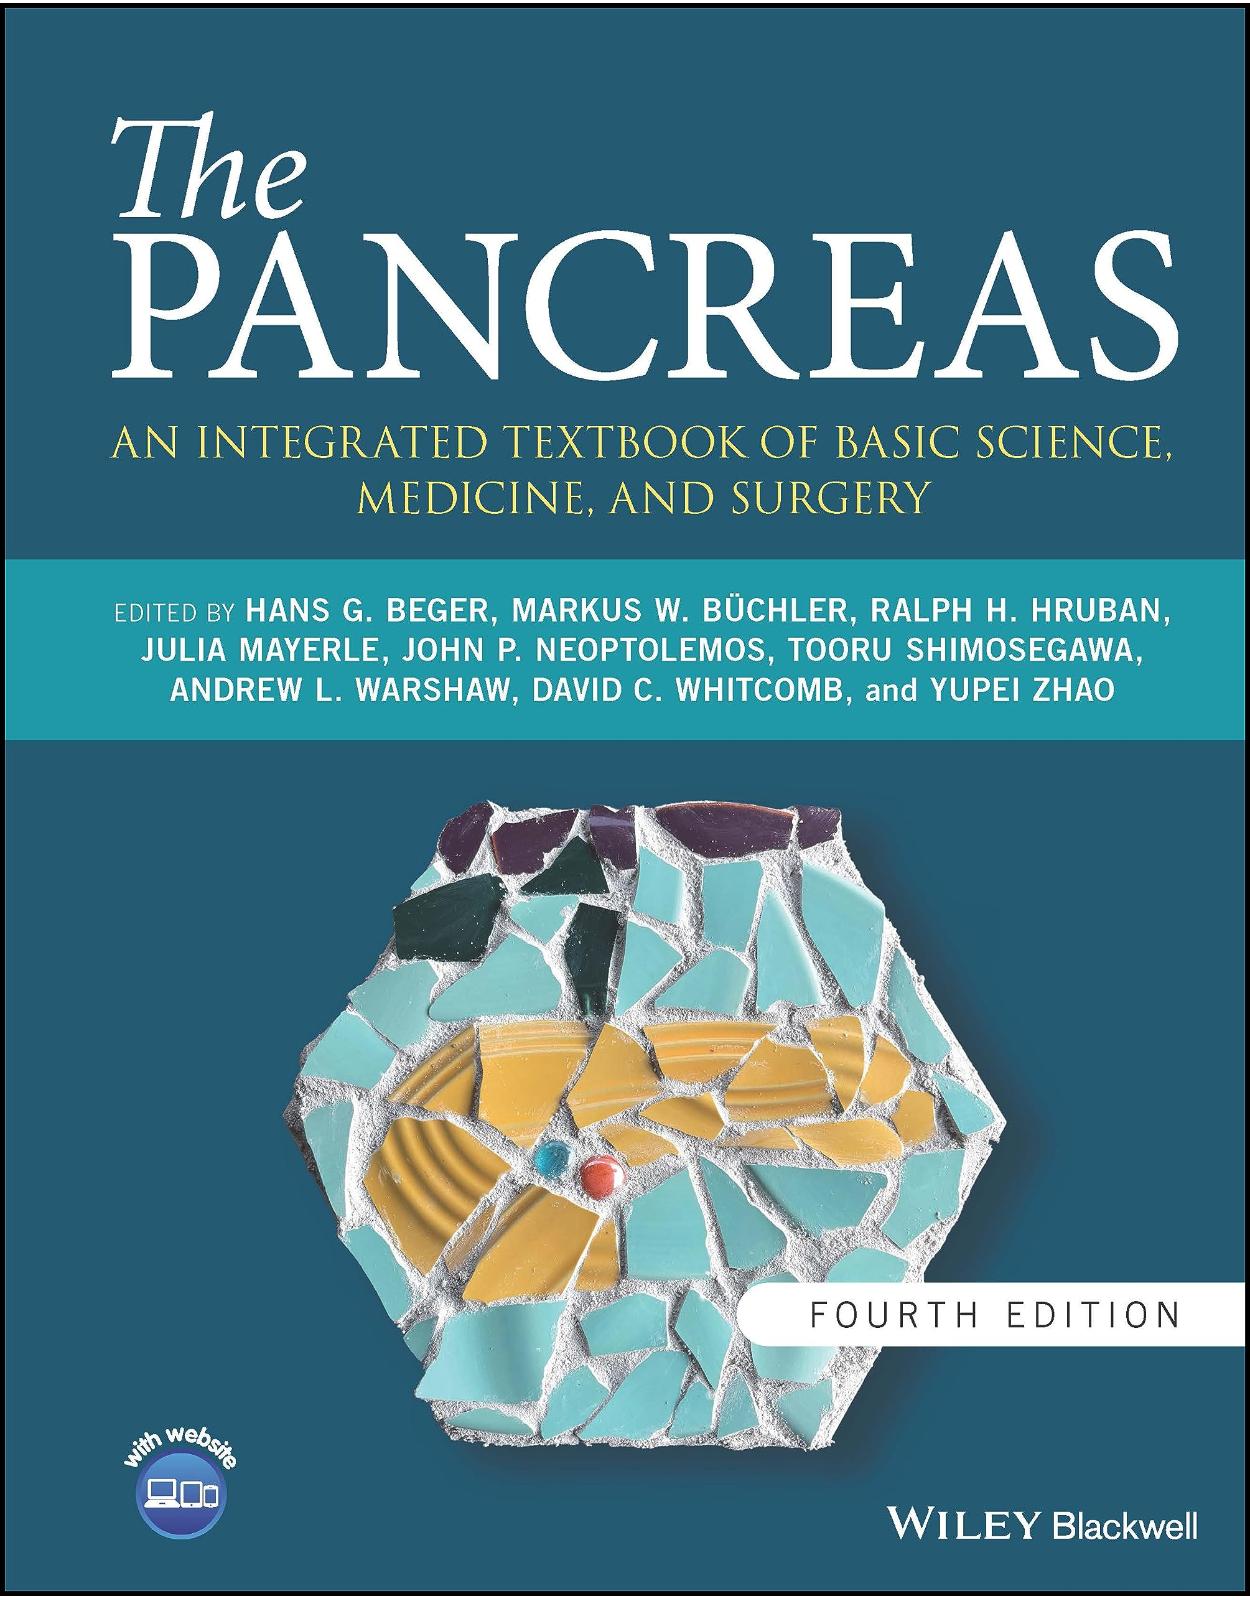 The Pancreas  An Integrated Textbook of Basic Science, Medicine, and Surgery